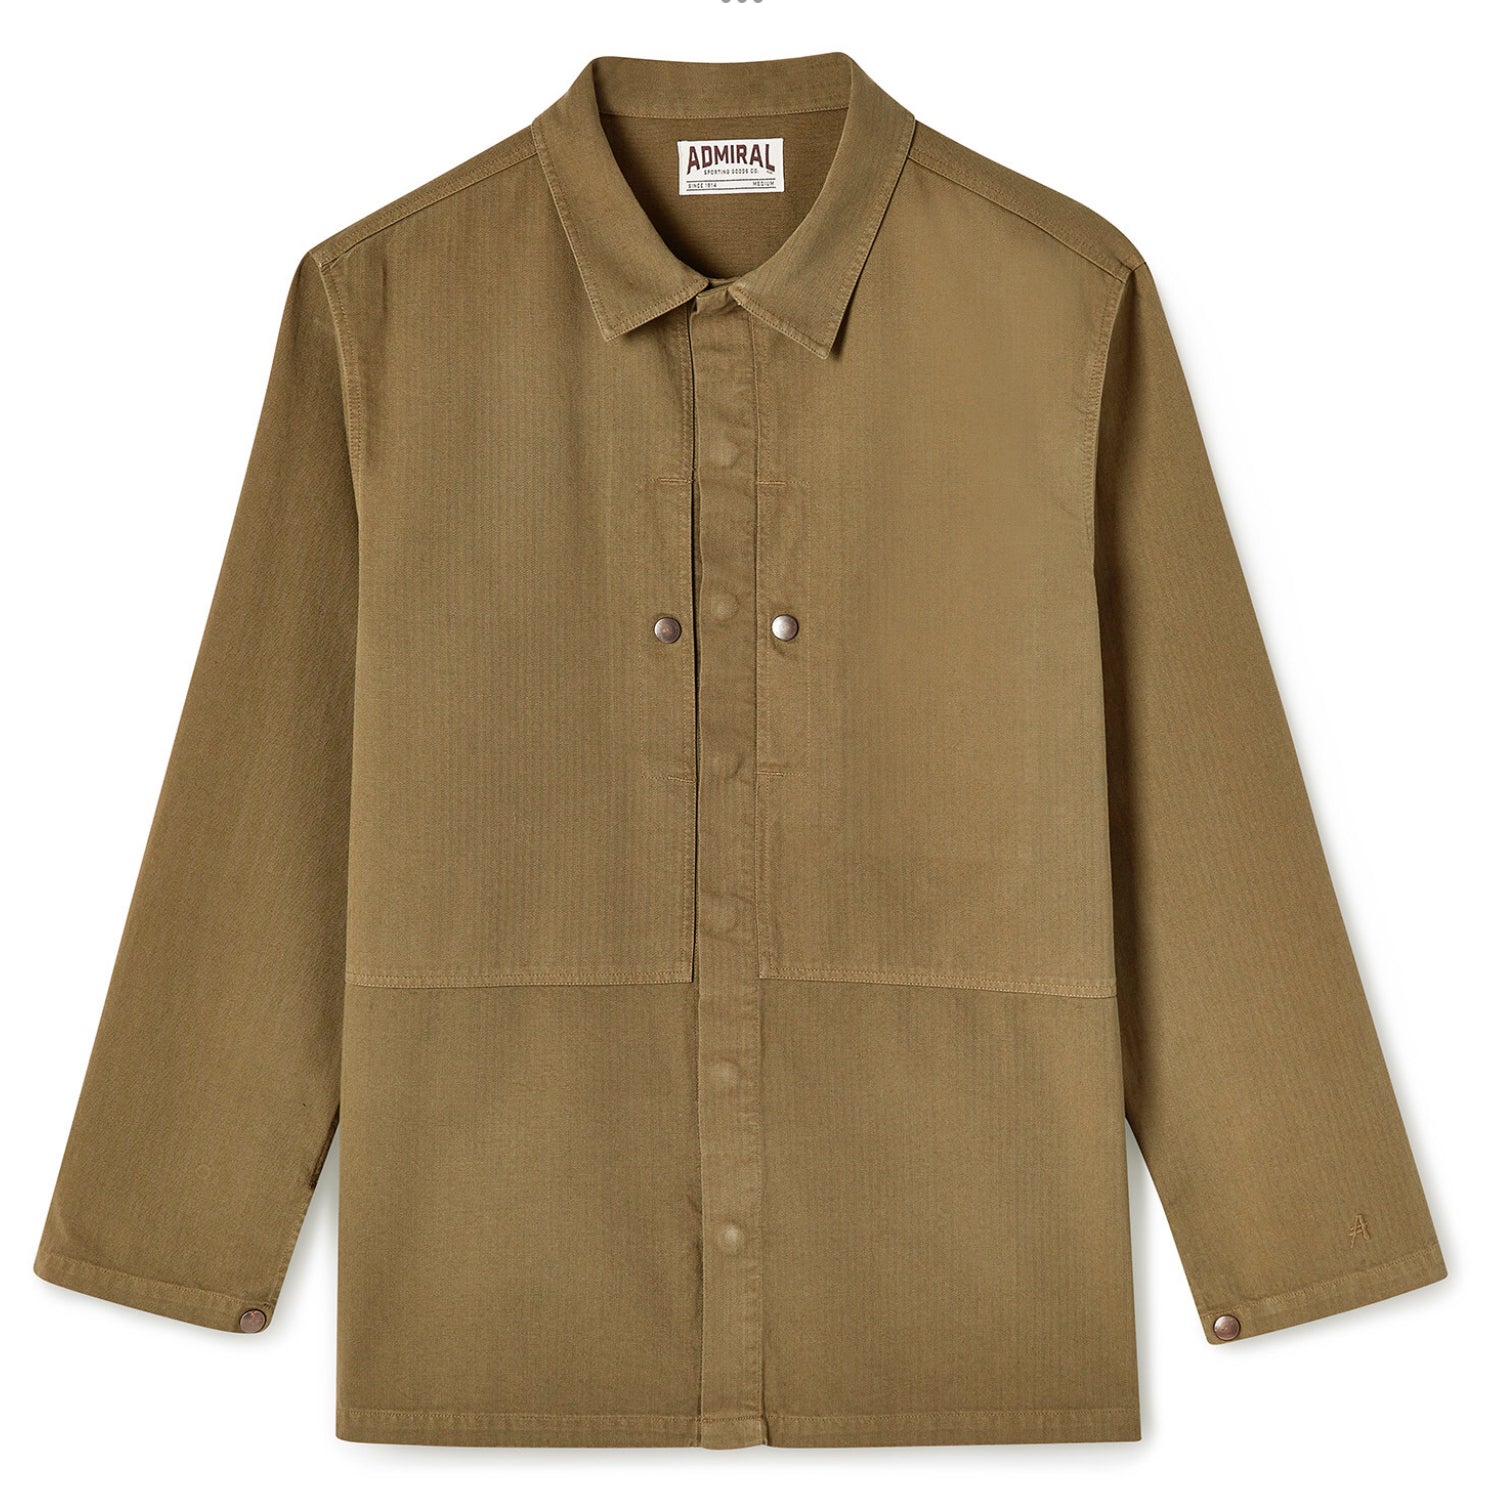 Admiral Sporting Goods Deacon Muted Corn Overshirt